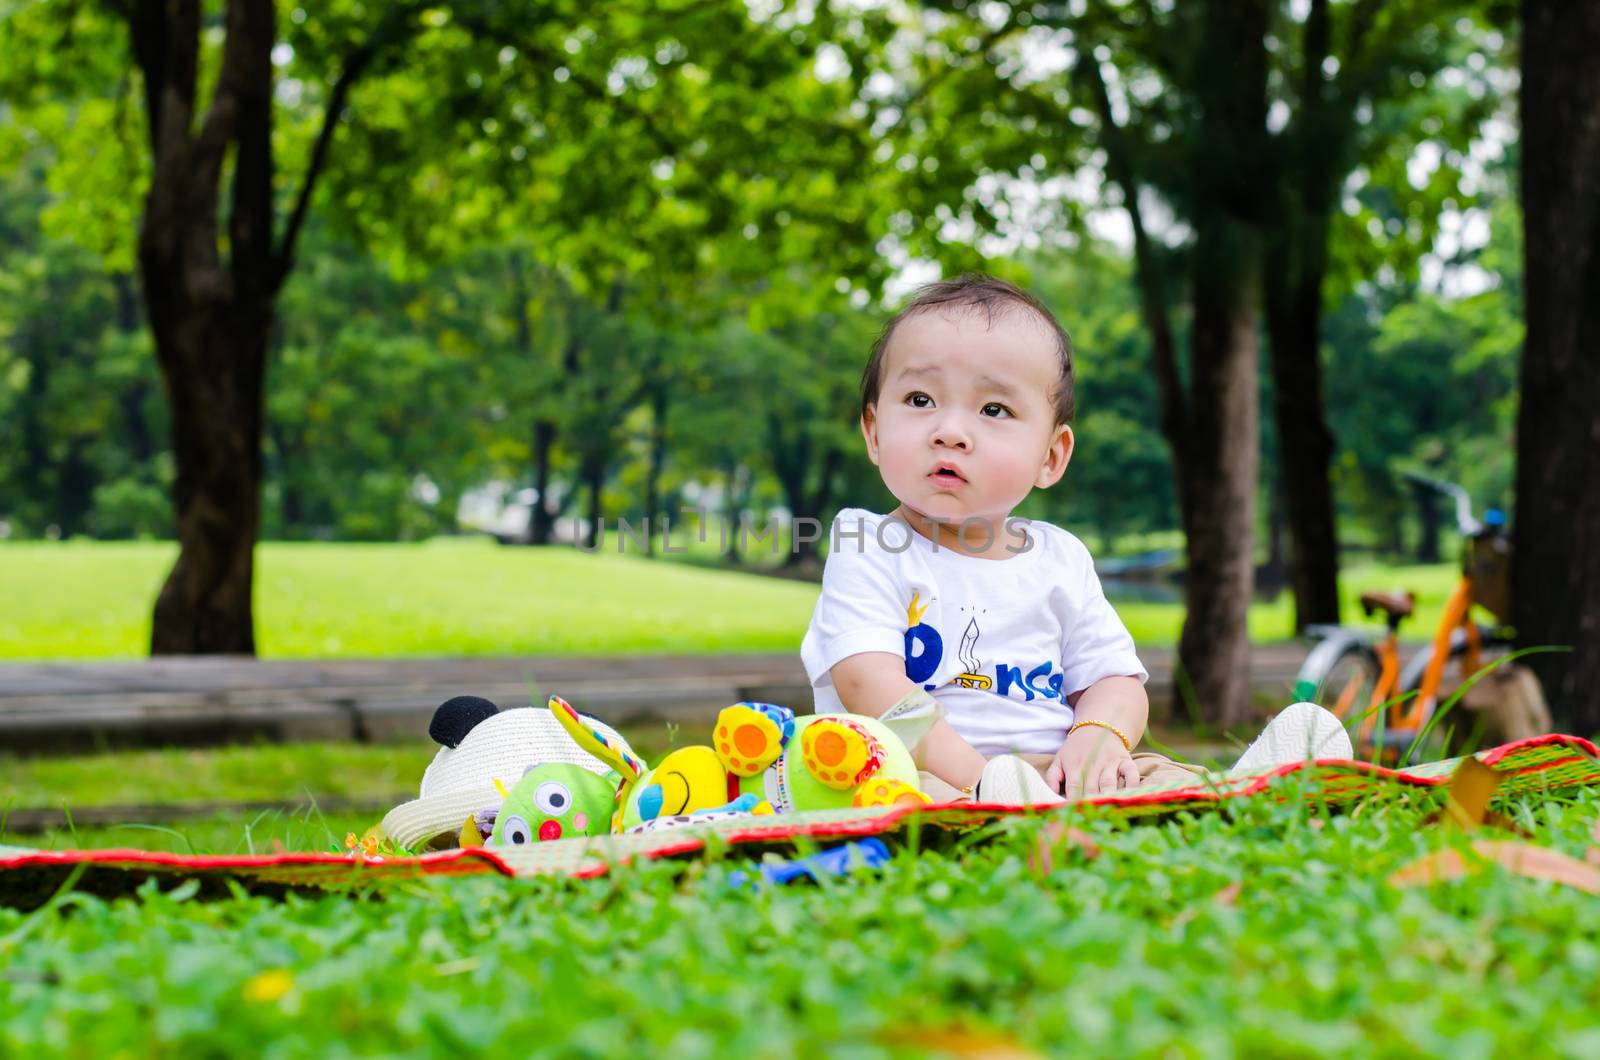 Asian baby sitting in park.